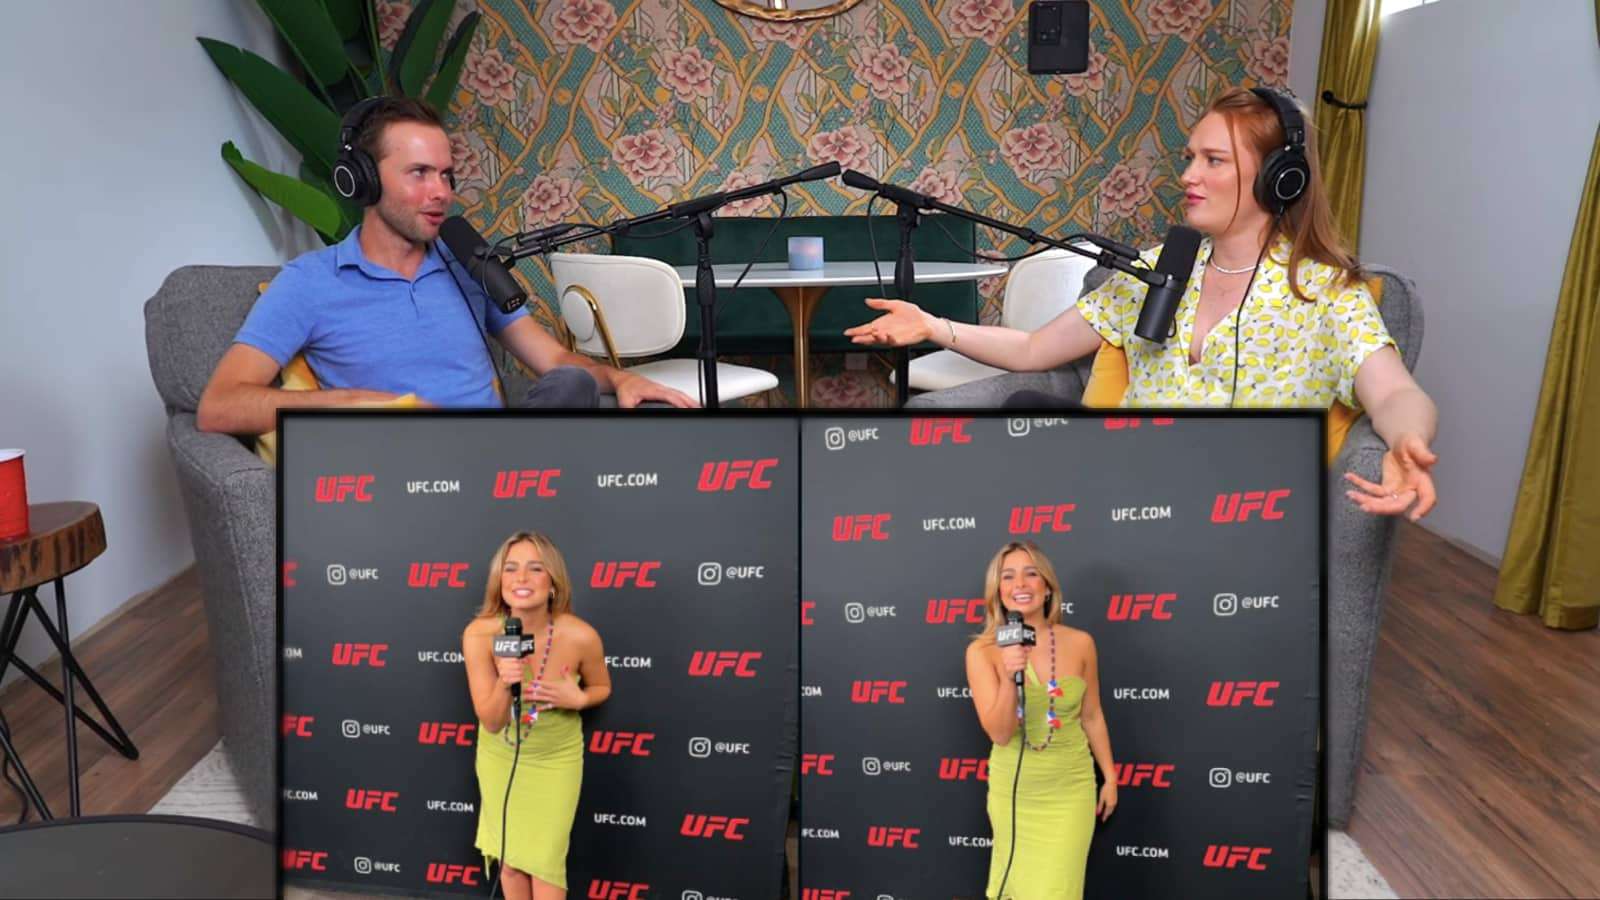 Lizze Gordon and Ryland Adams discussing Addison Rae's UFC reporting role